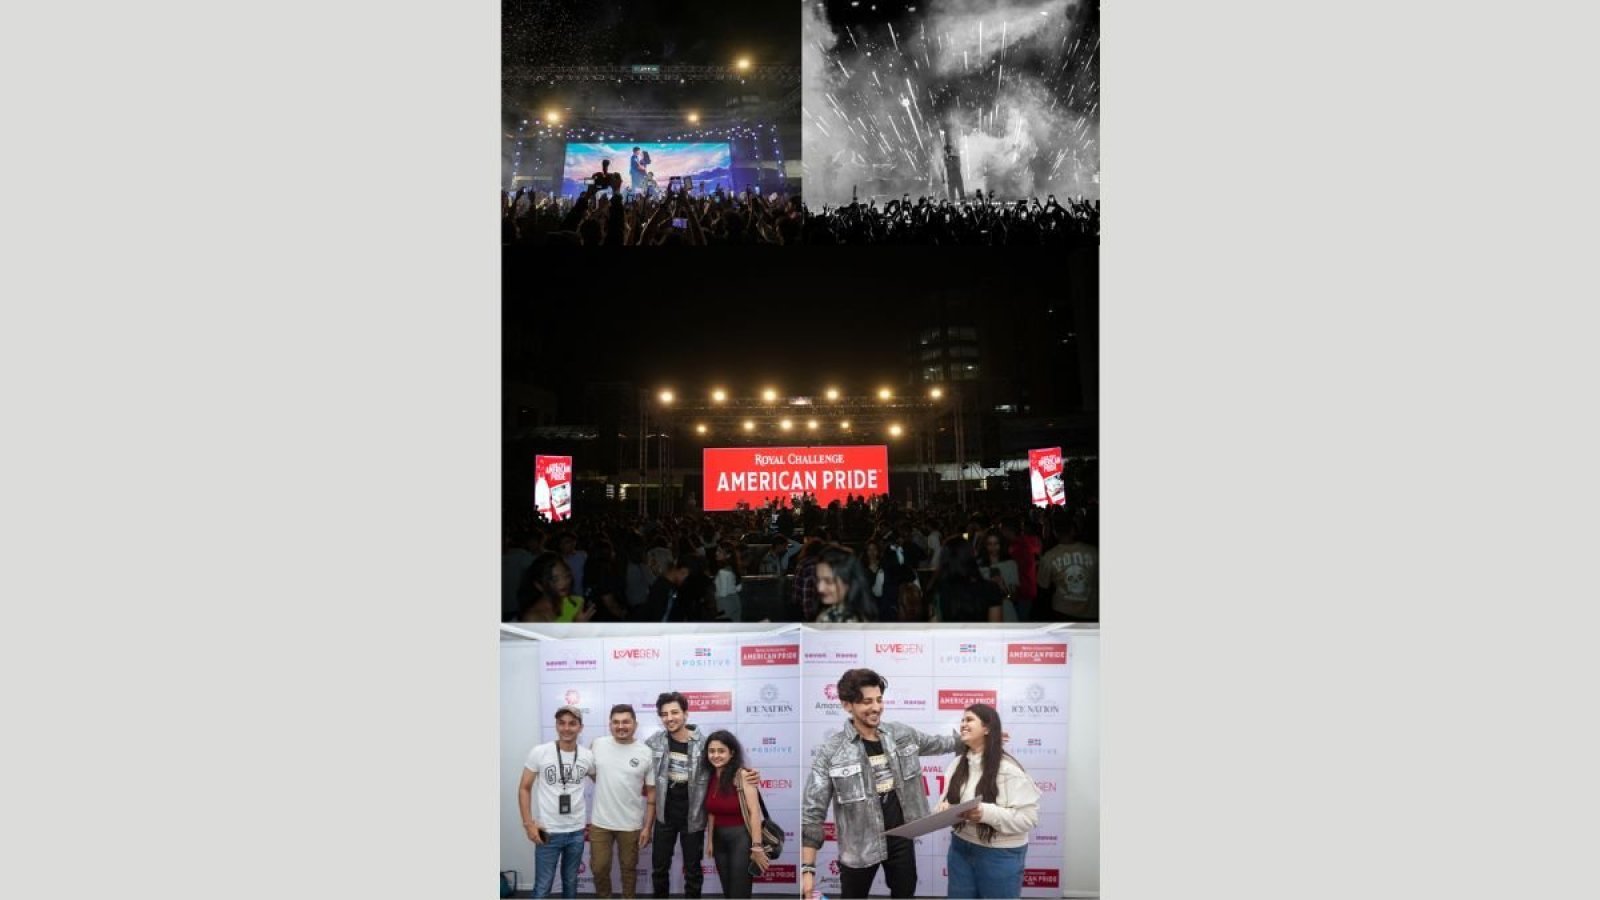 Darshan Raval’s Unforgettable Show on January 14th, Garnering Praise from 5000+ Enthusiastic Fans, Credits American Pride Soda as Powered by Partner and MCA Worldwide as Marketing & PR Partner